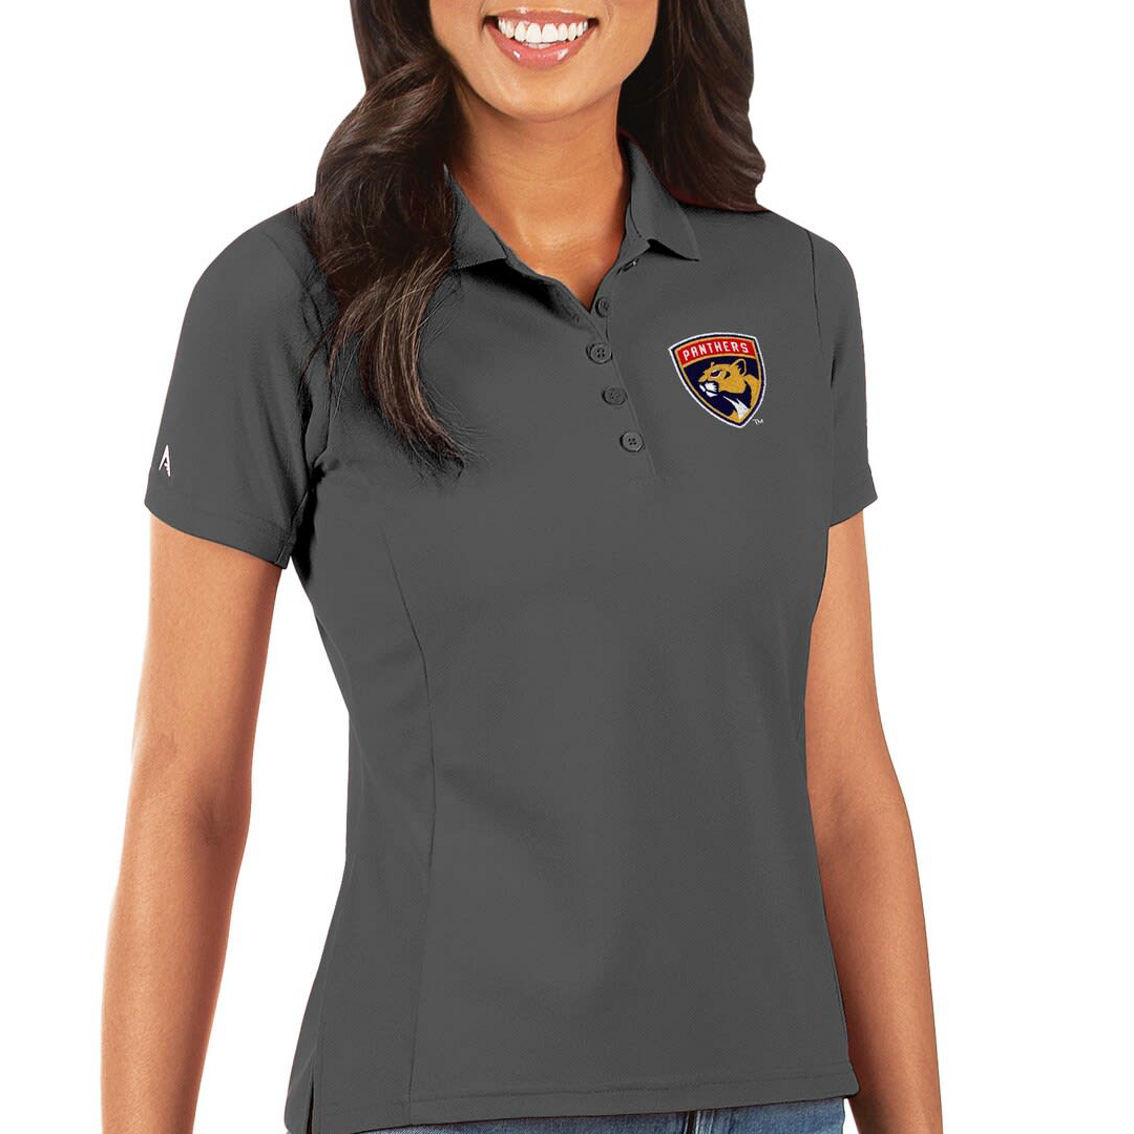 Antigua Women's Charcoal Florida Panthers Legacy Pique Polo - Image 2 of 2